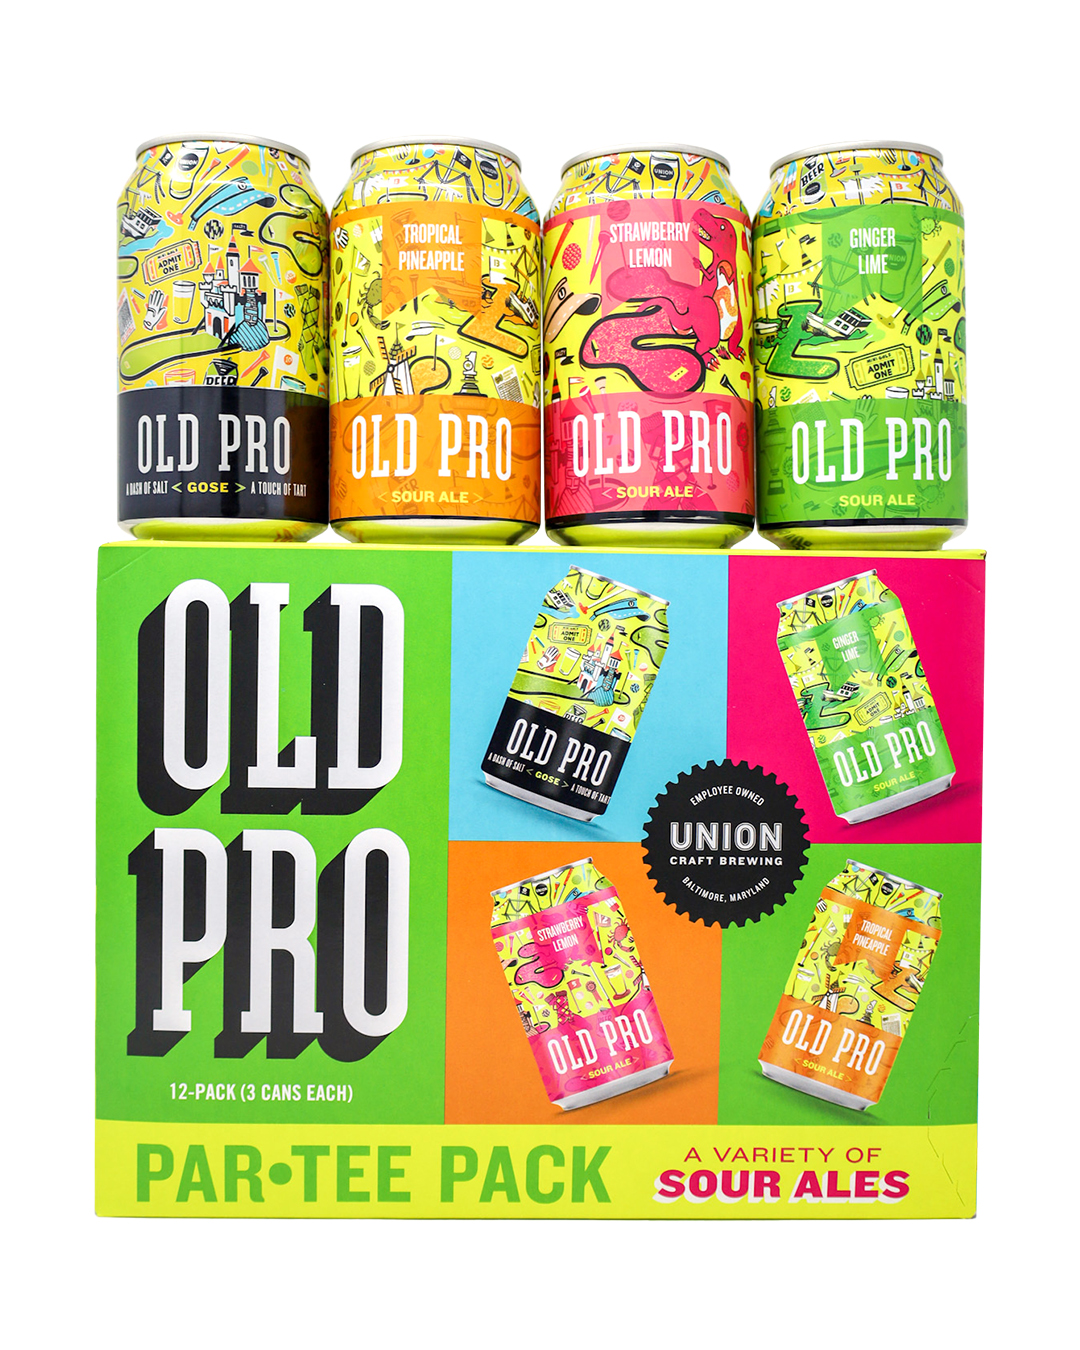 UNION Craft Brewing Introduces Old Pro Par-Tee Pack A Refreshing Collection of Sour Ales Perfect for Any Occasion